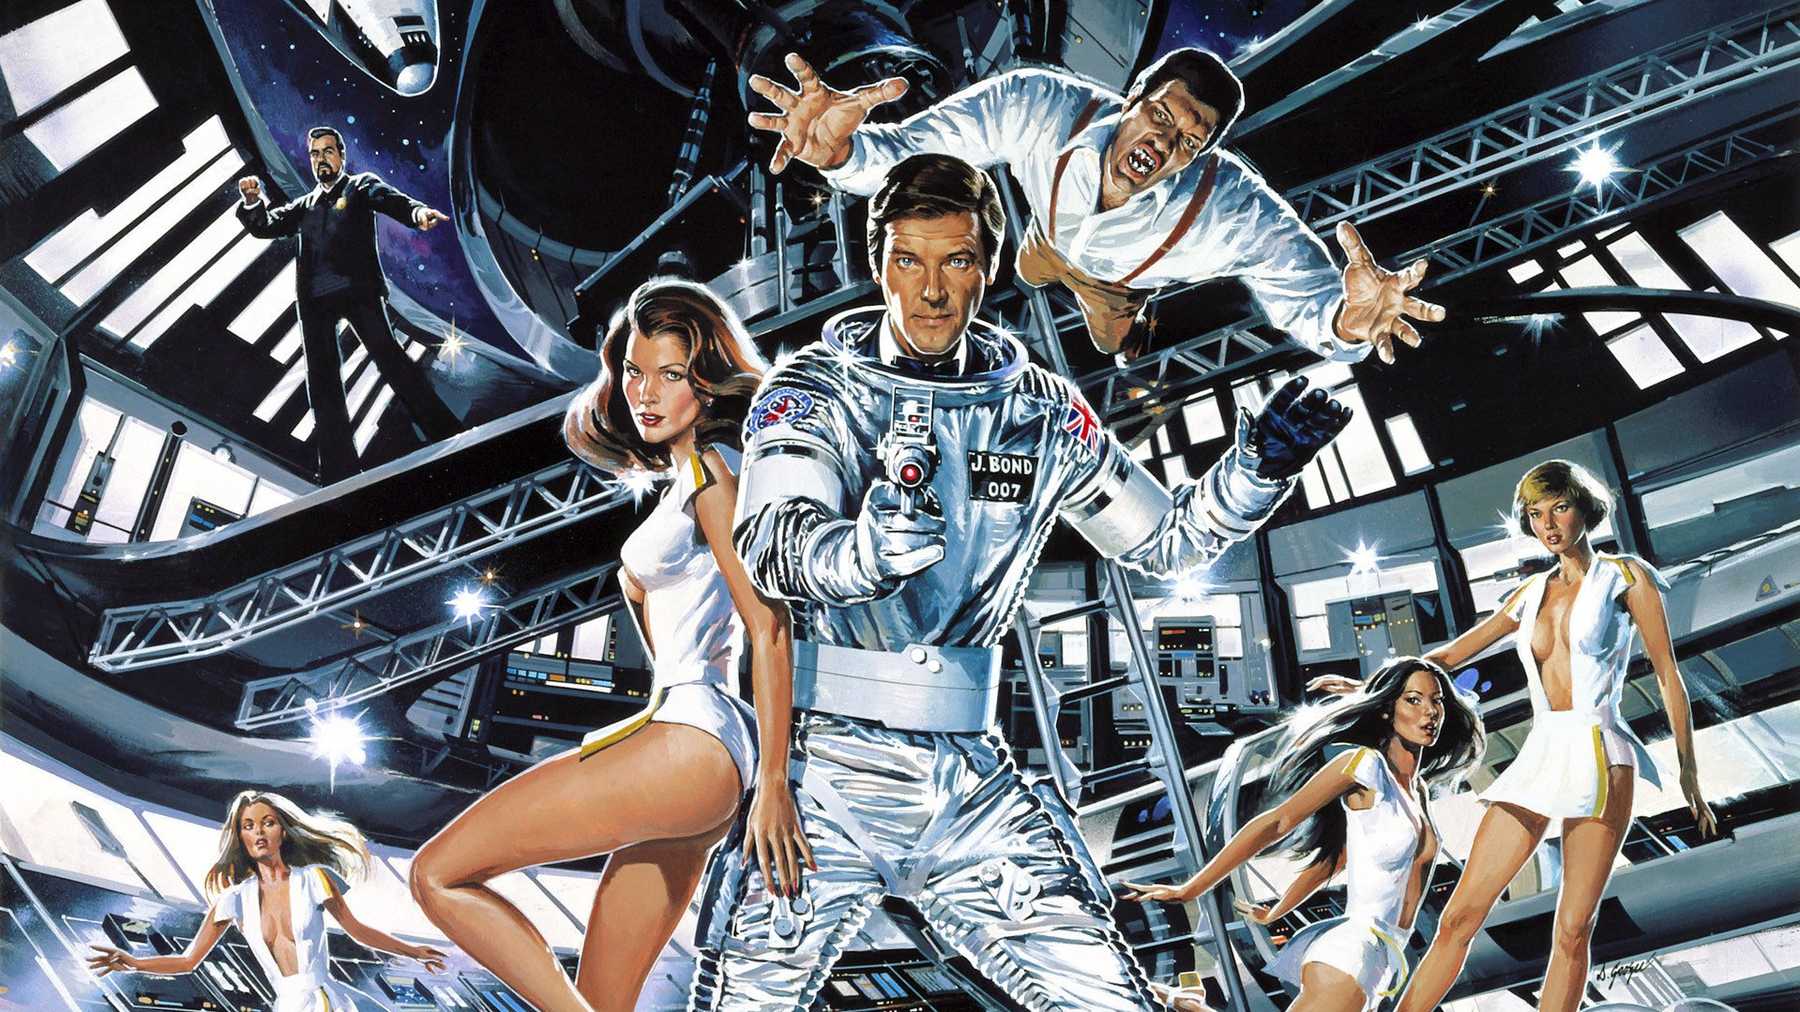 Moonraker: What The Heck Did I Just Watch? – We Minored in Film